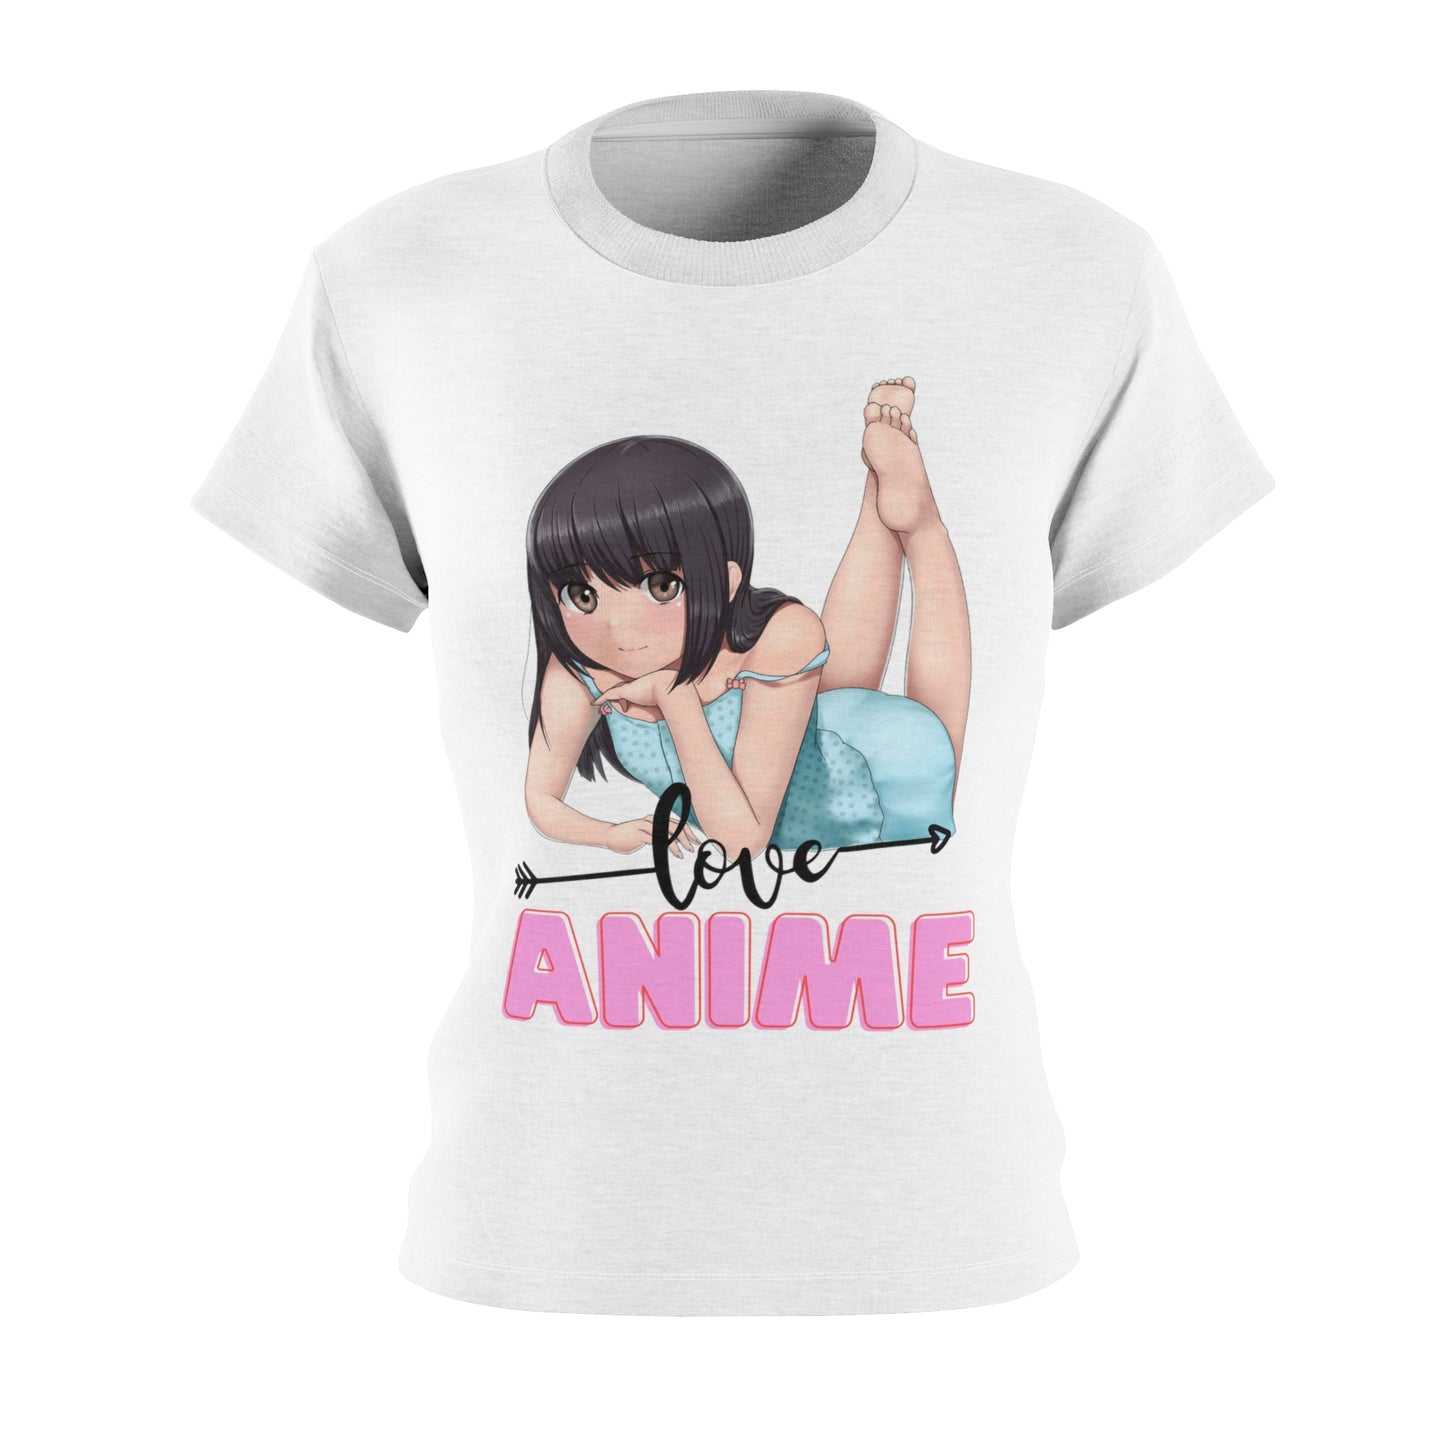 Anime Collection - Women's Cut & Sew Tee (AOP) - Love Anime in White